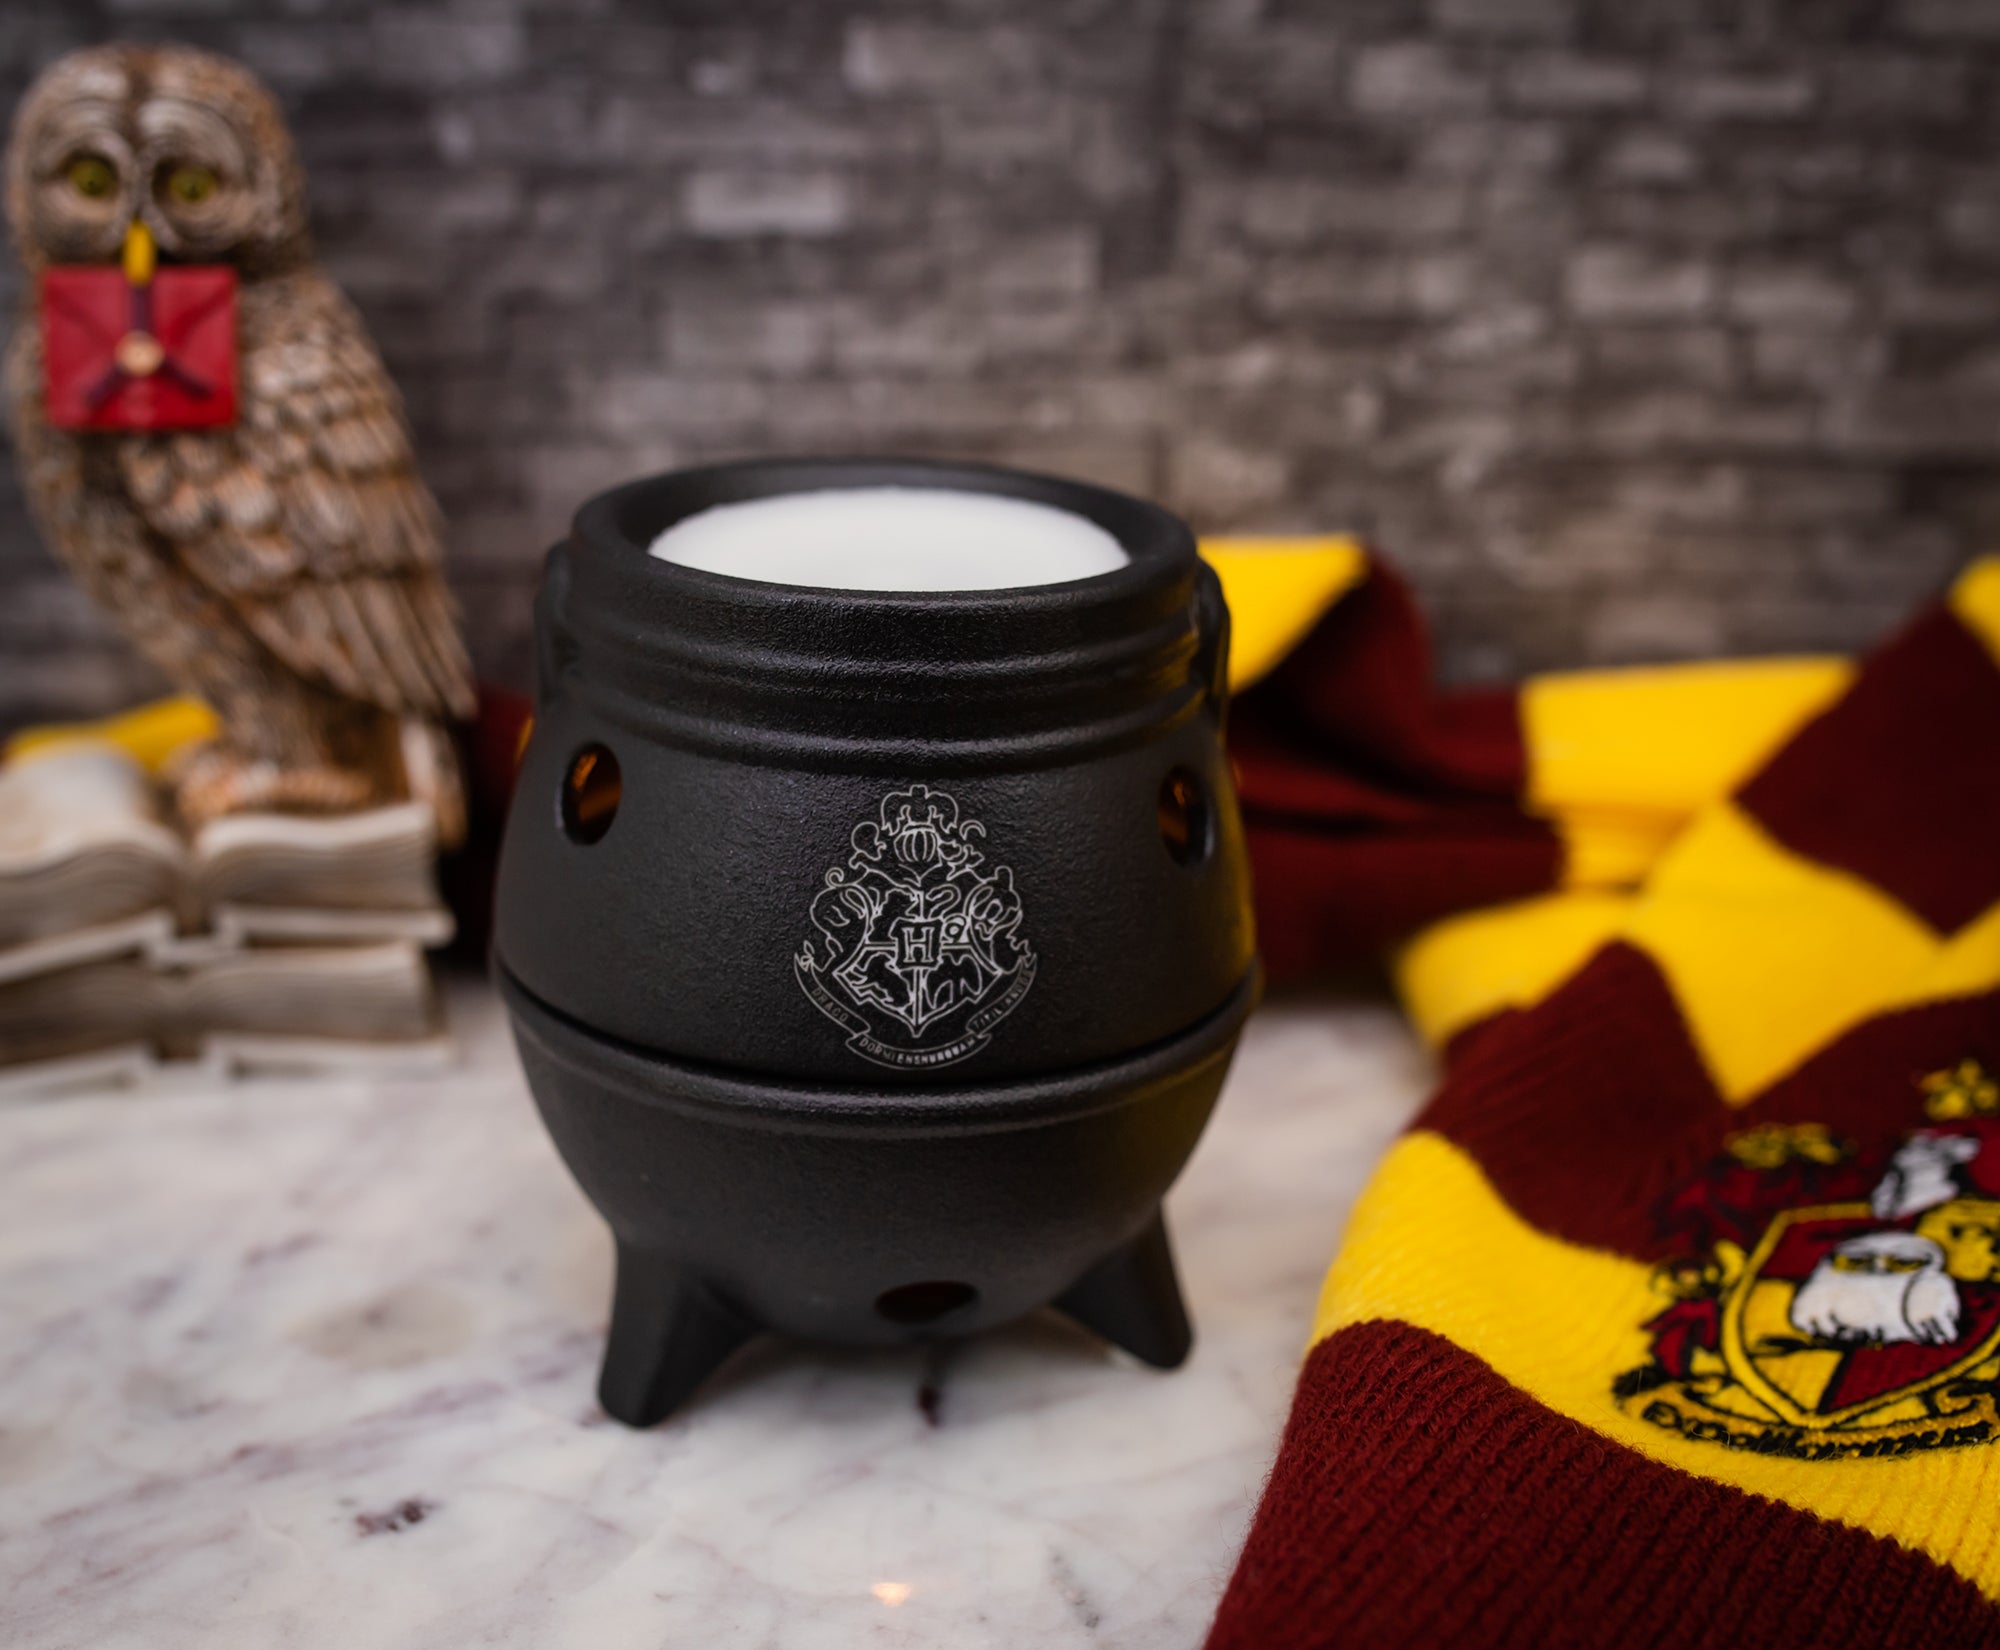 SCENTSY HARRY POTTER HOGWARTS Wax Warmer -collectible - Without